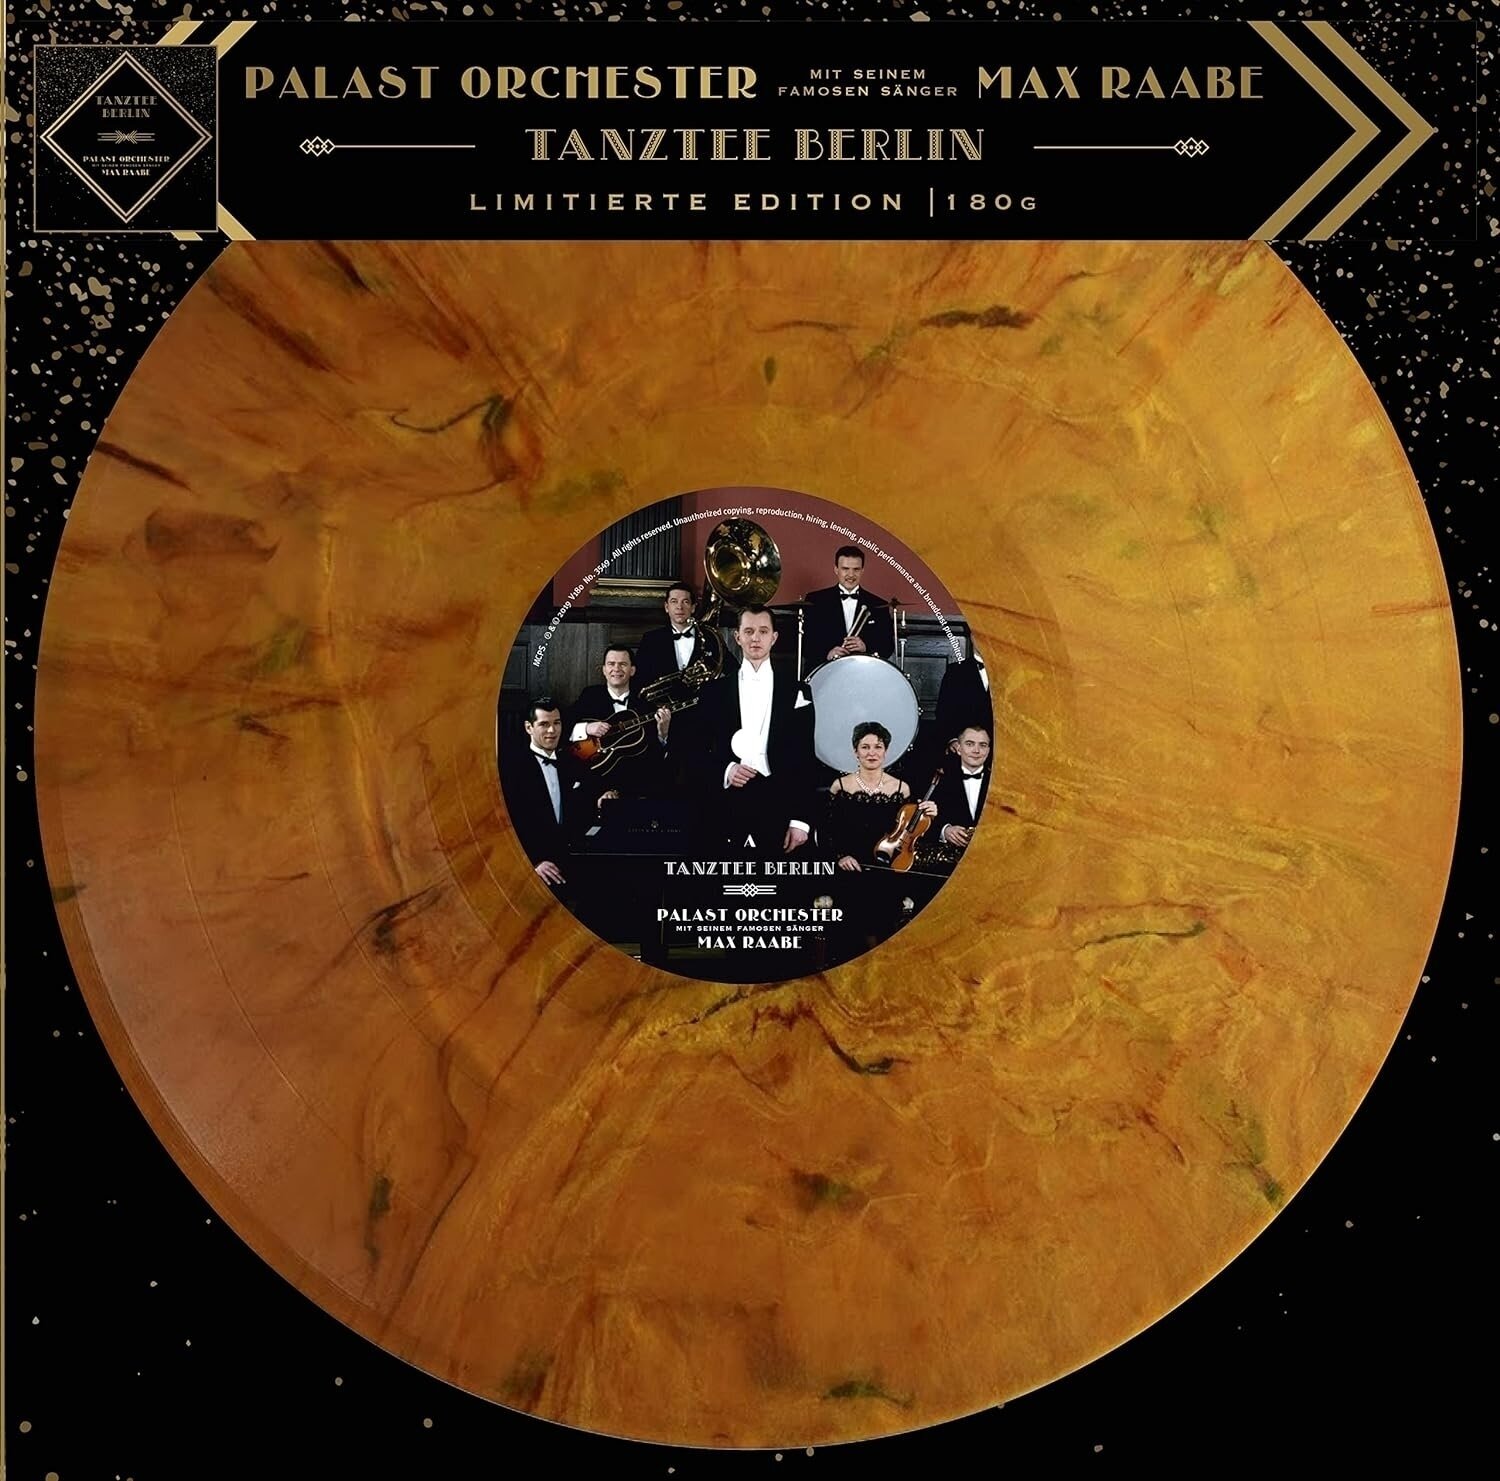 Disco in vinile Palast Orchester - Tanztee Berlin (Limited Edition) (Golden Yellow Marbled Coloured) (LP)